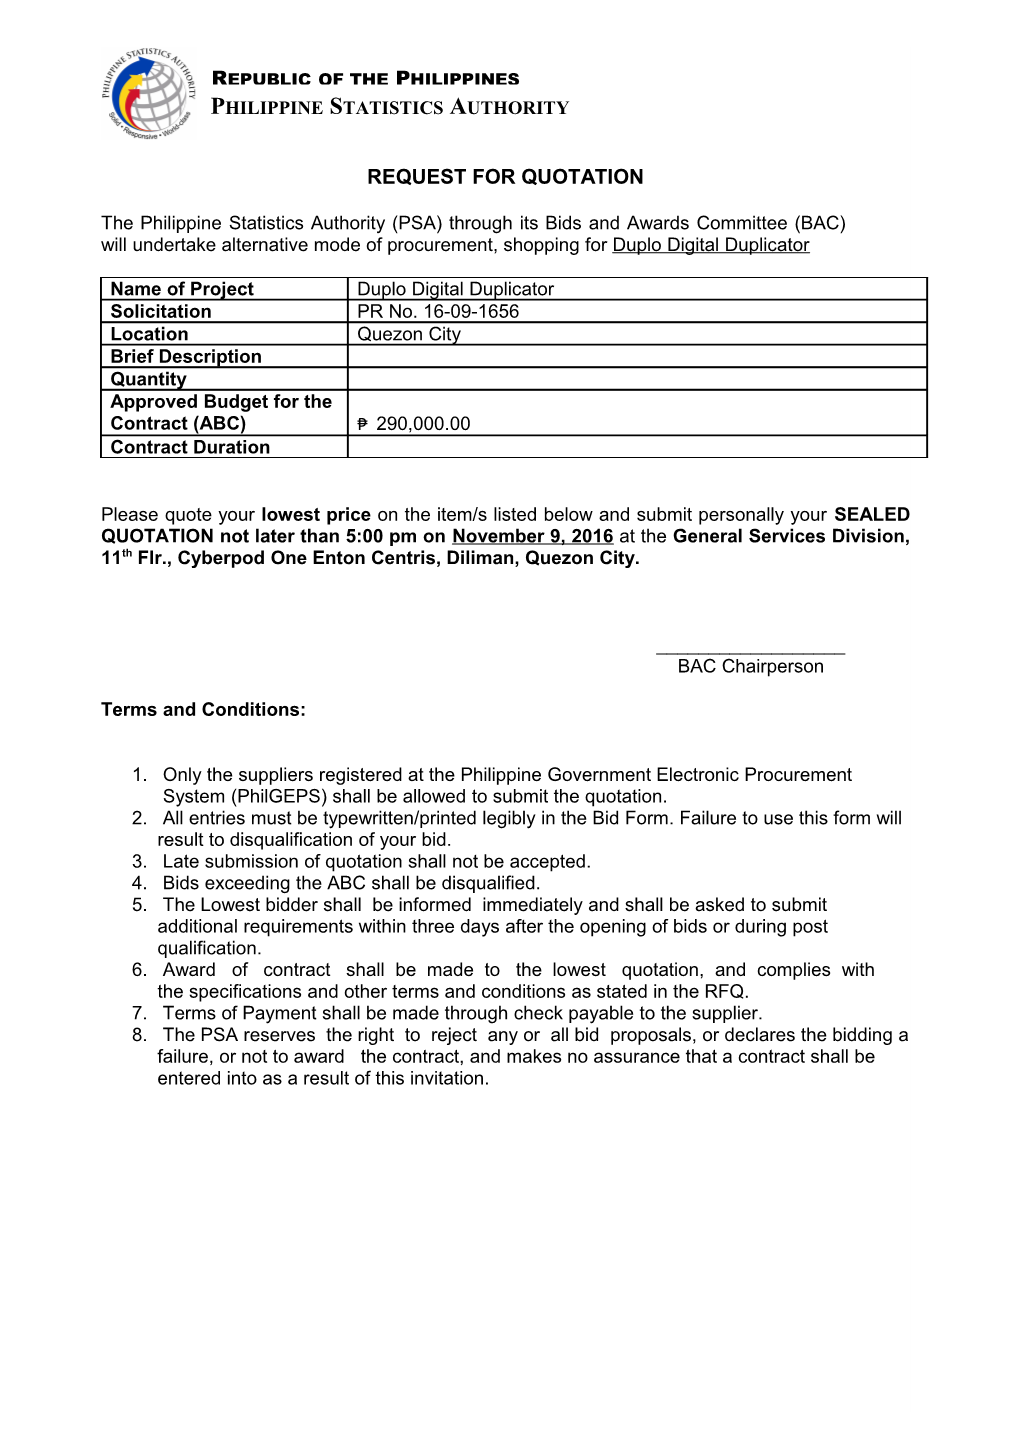 Request for Quotation s23